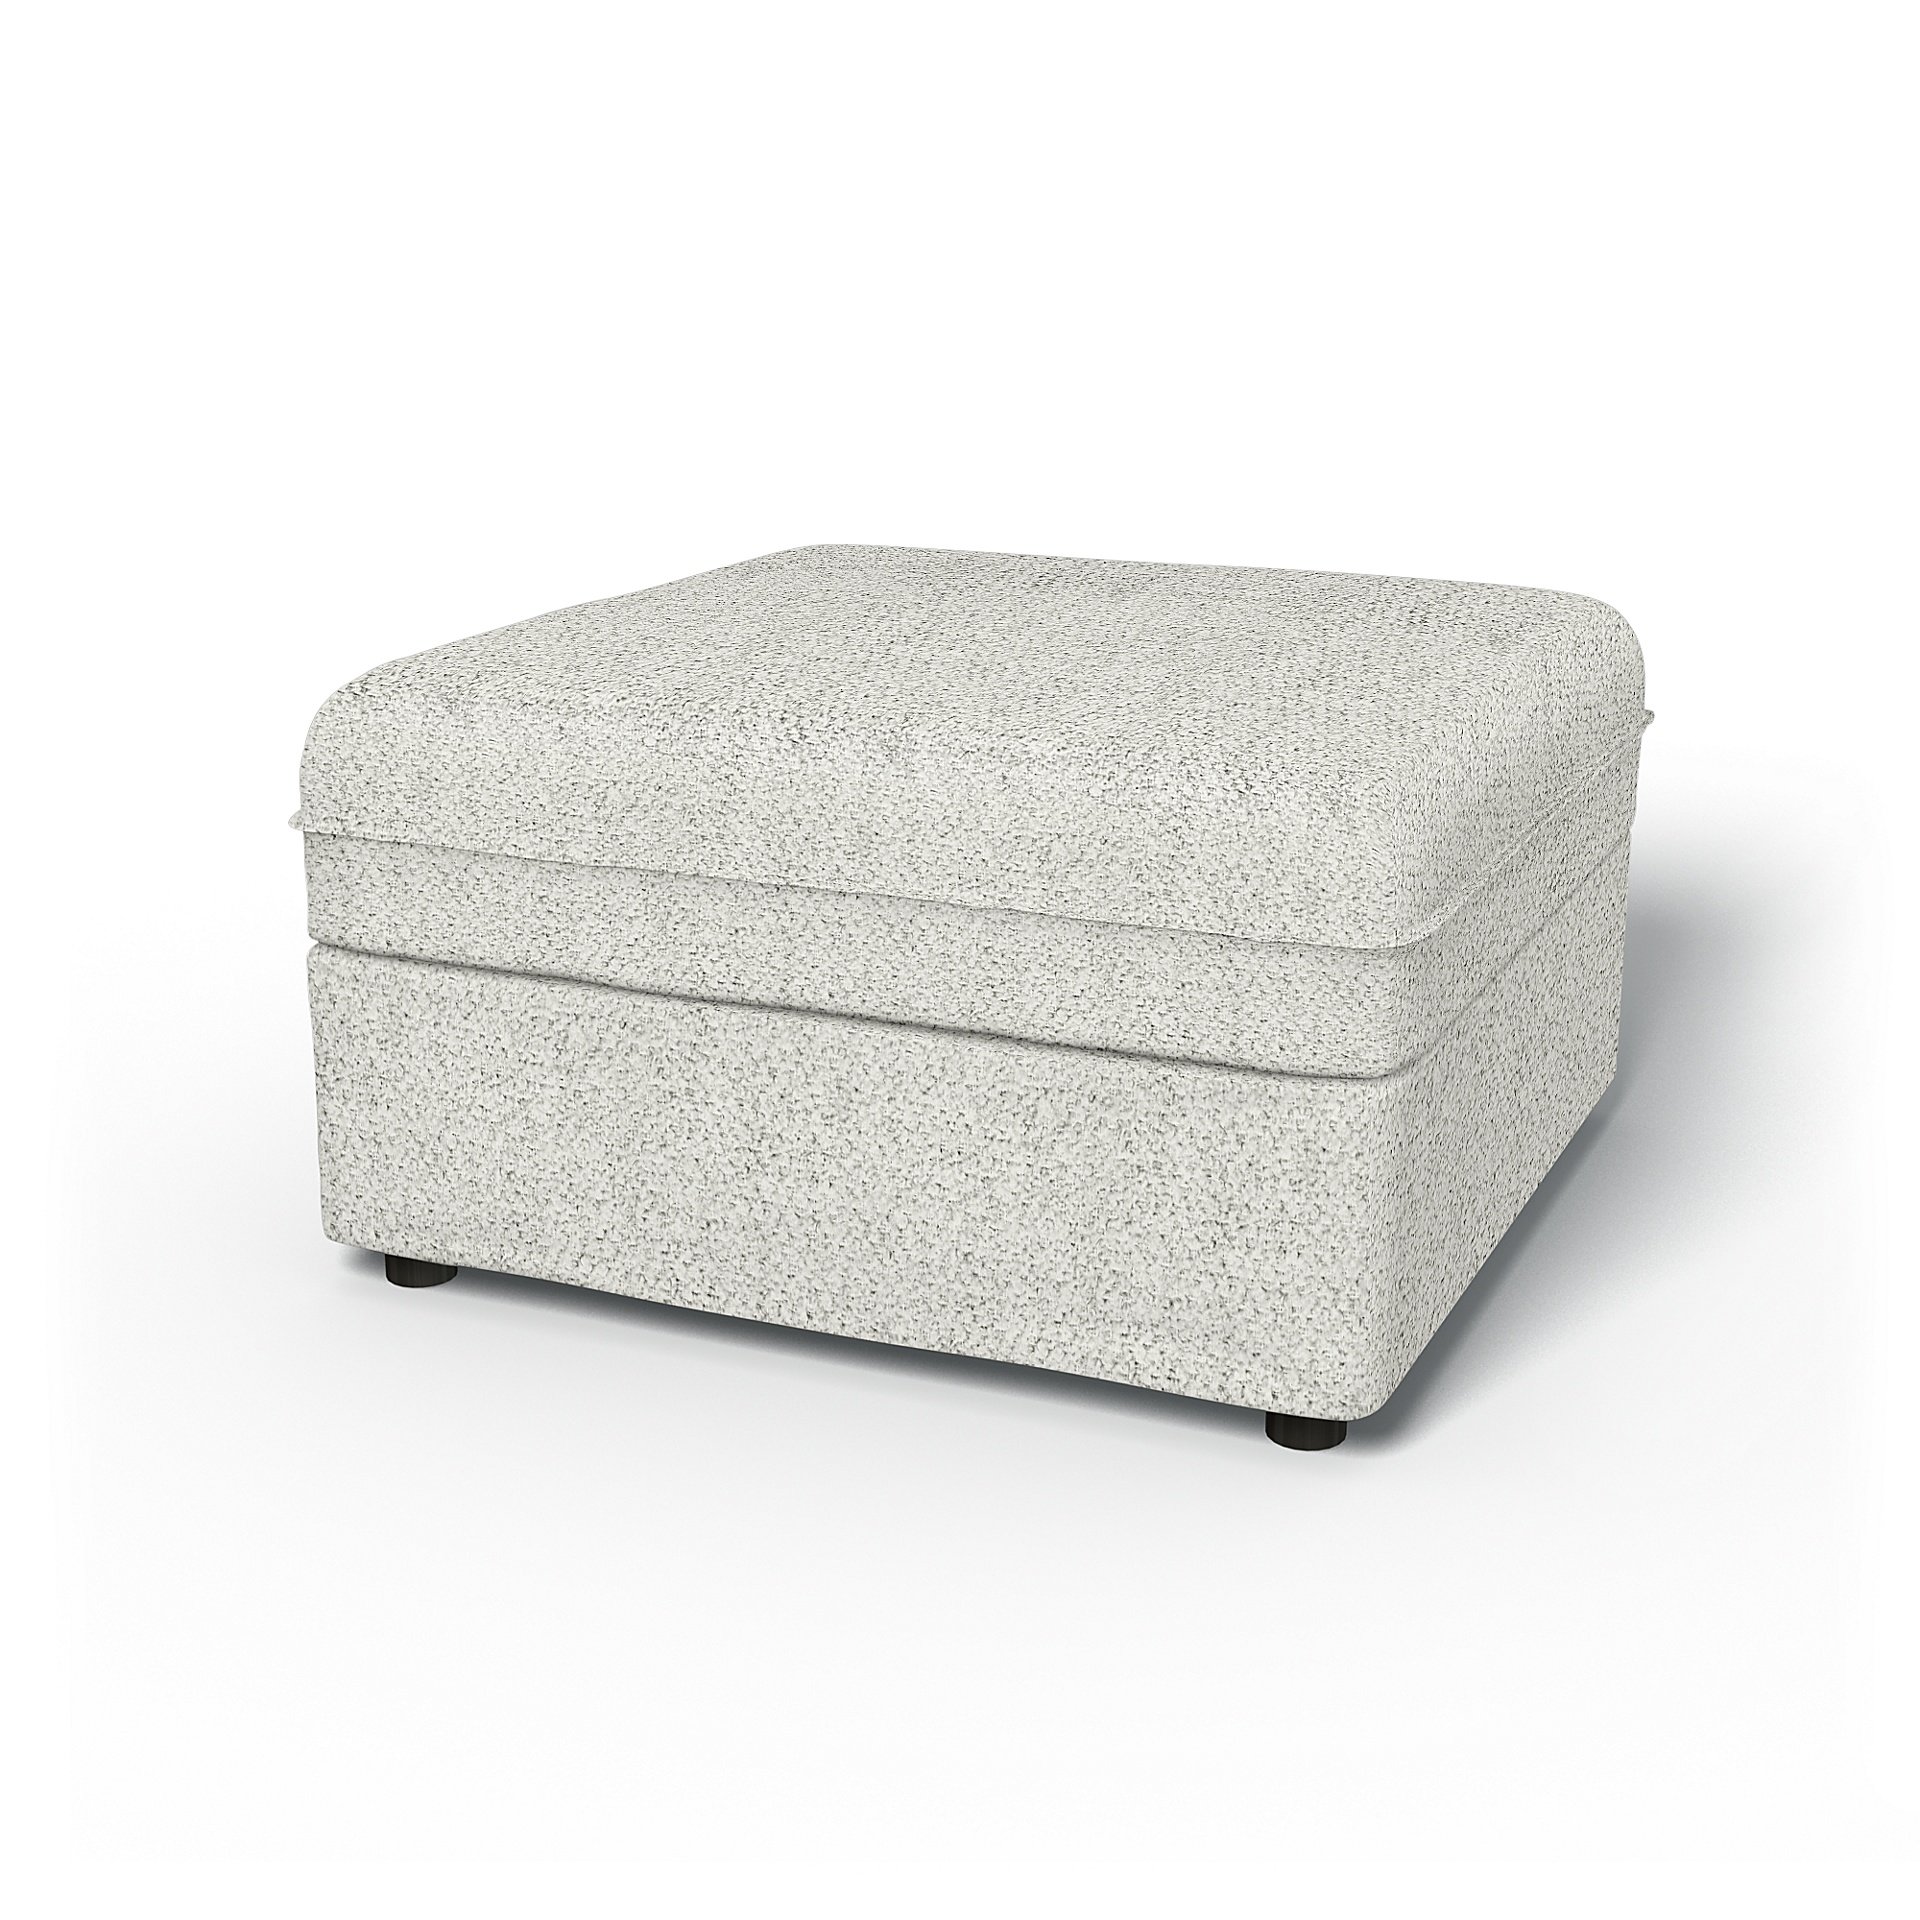 IKEA - Vallentuna Seat Module with Storage Cover 80x80cm 32x32in, Ivory, Boucle & Texture - Bemz